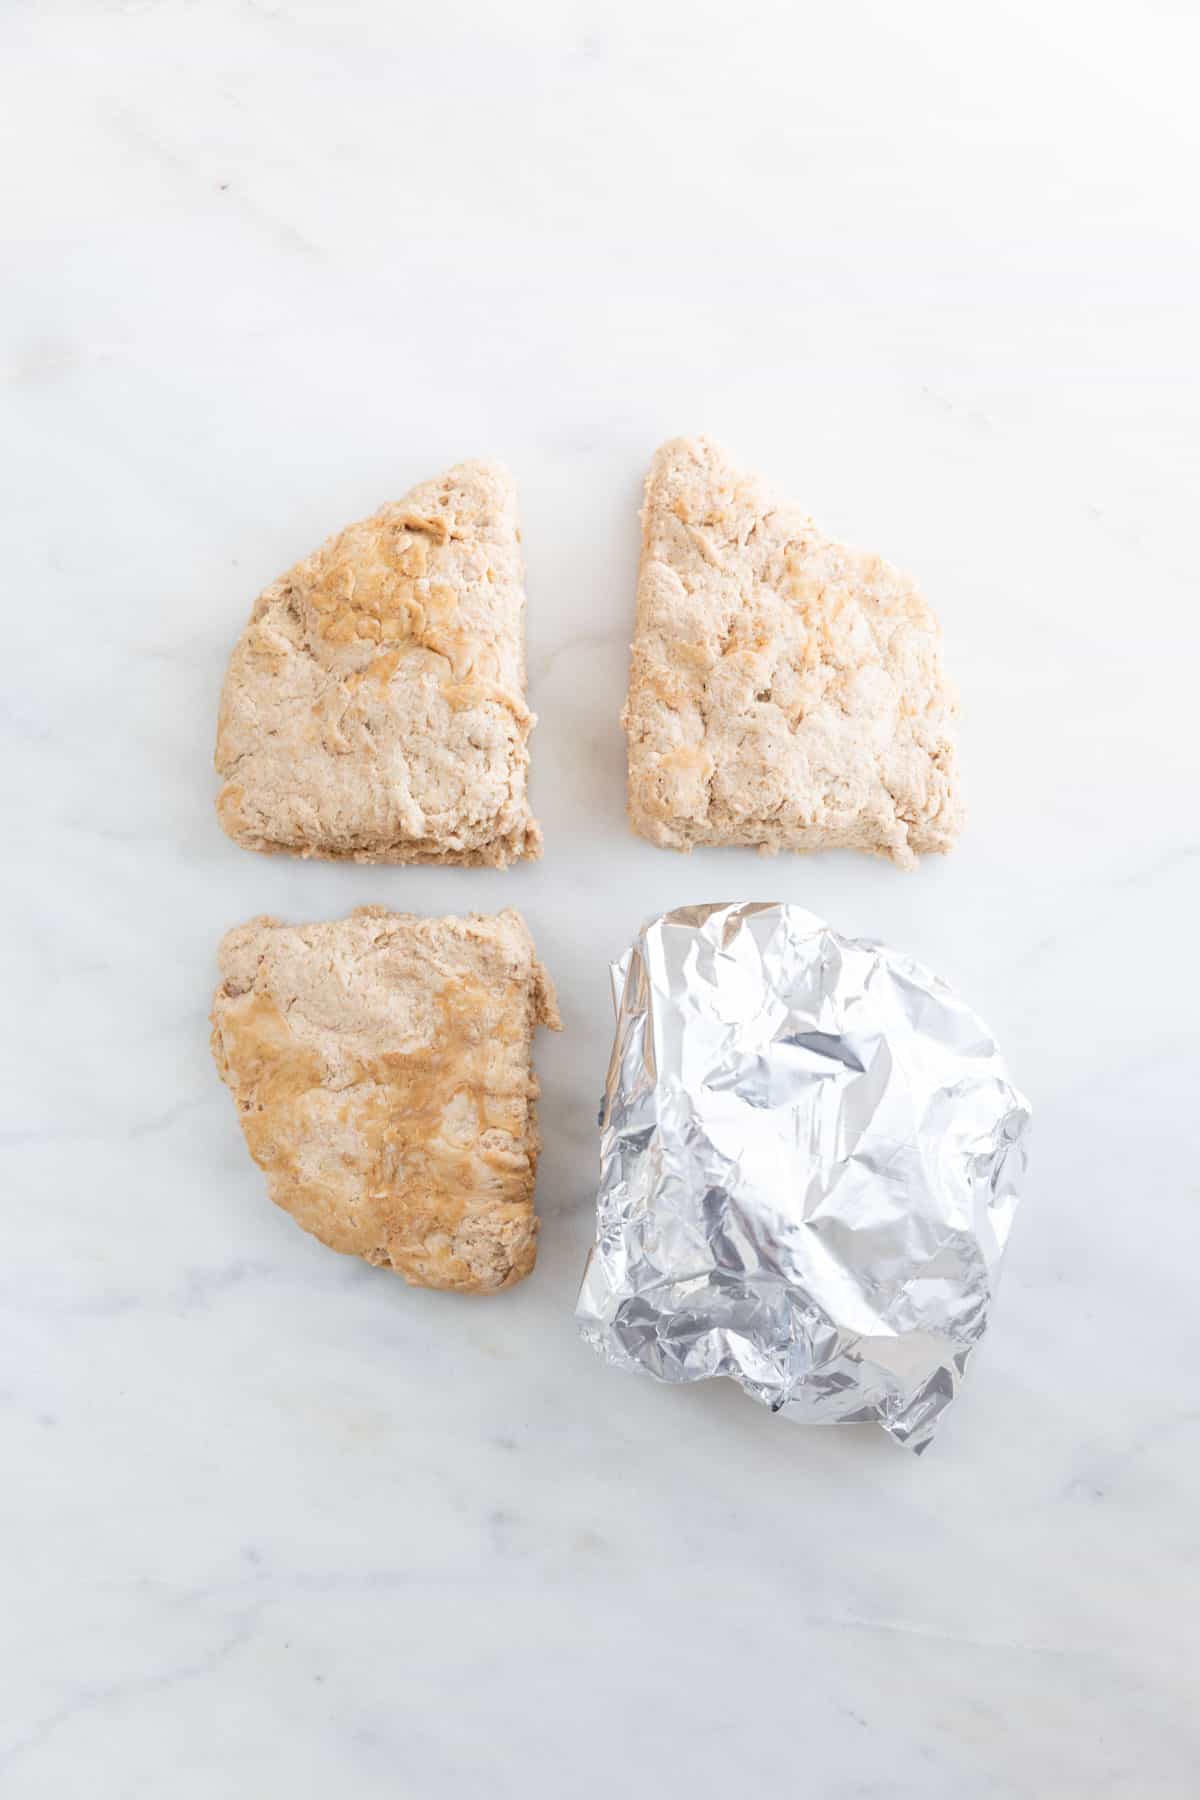 The dough flatten and cut into 4 pieces, one of them wrapped in aluminum foil.